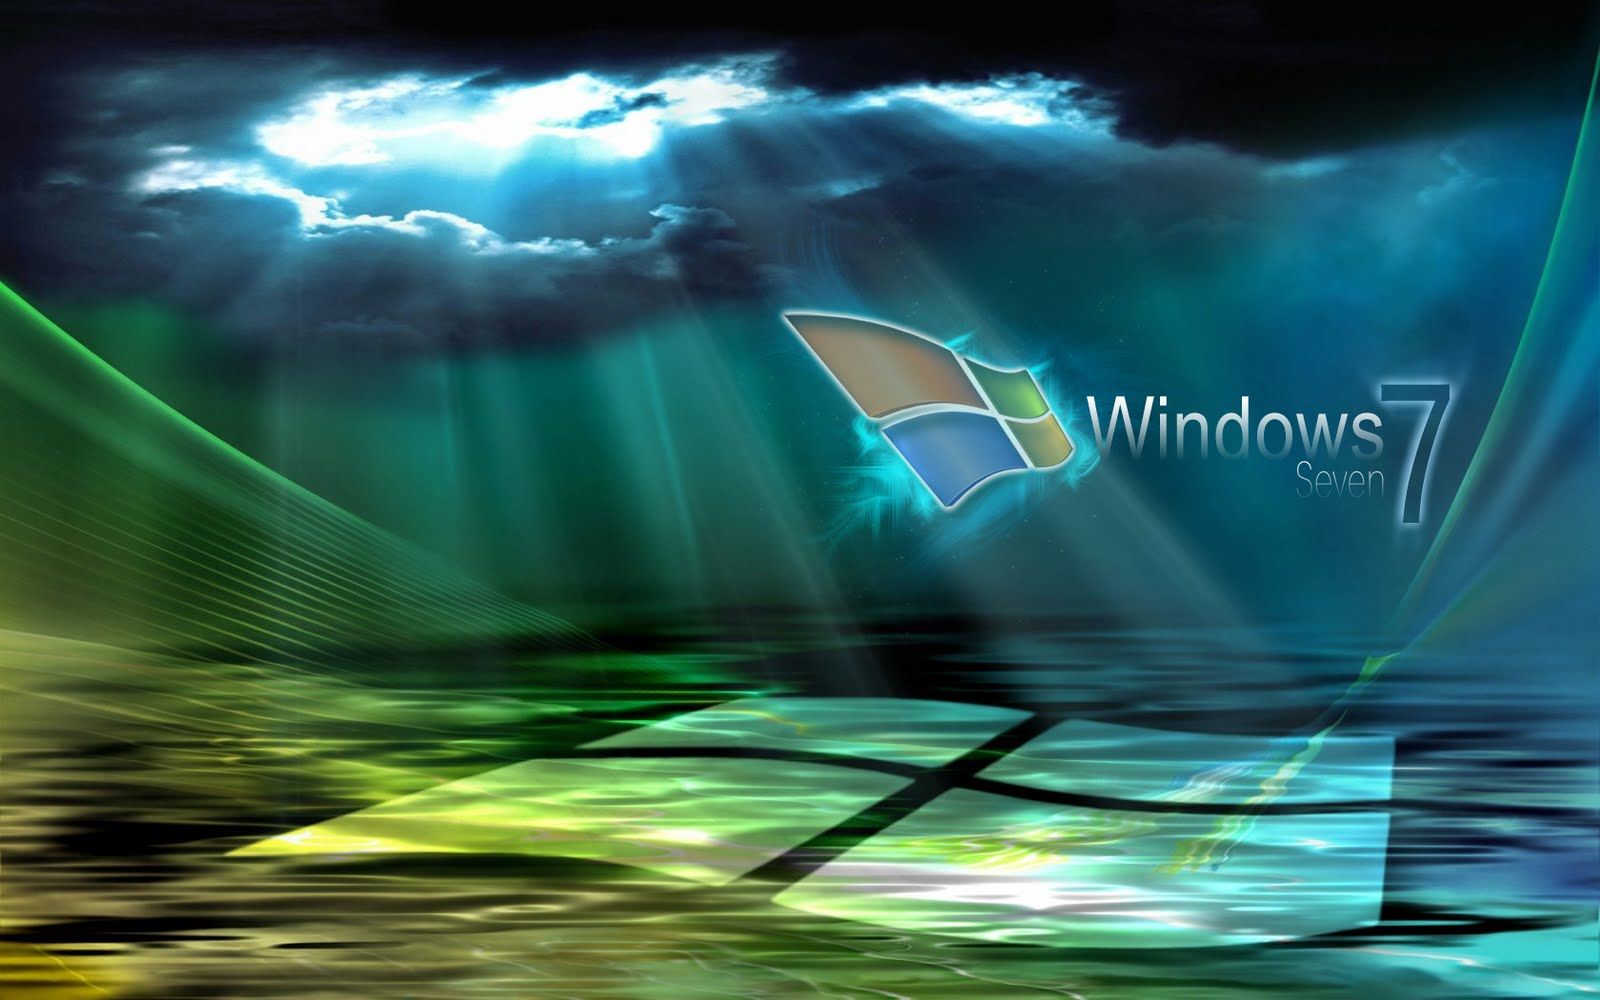 Free Windows 7 Wallpapers - Wallpaper Cave